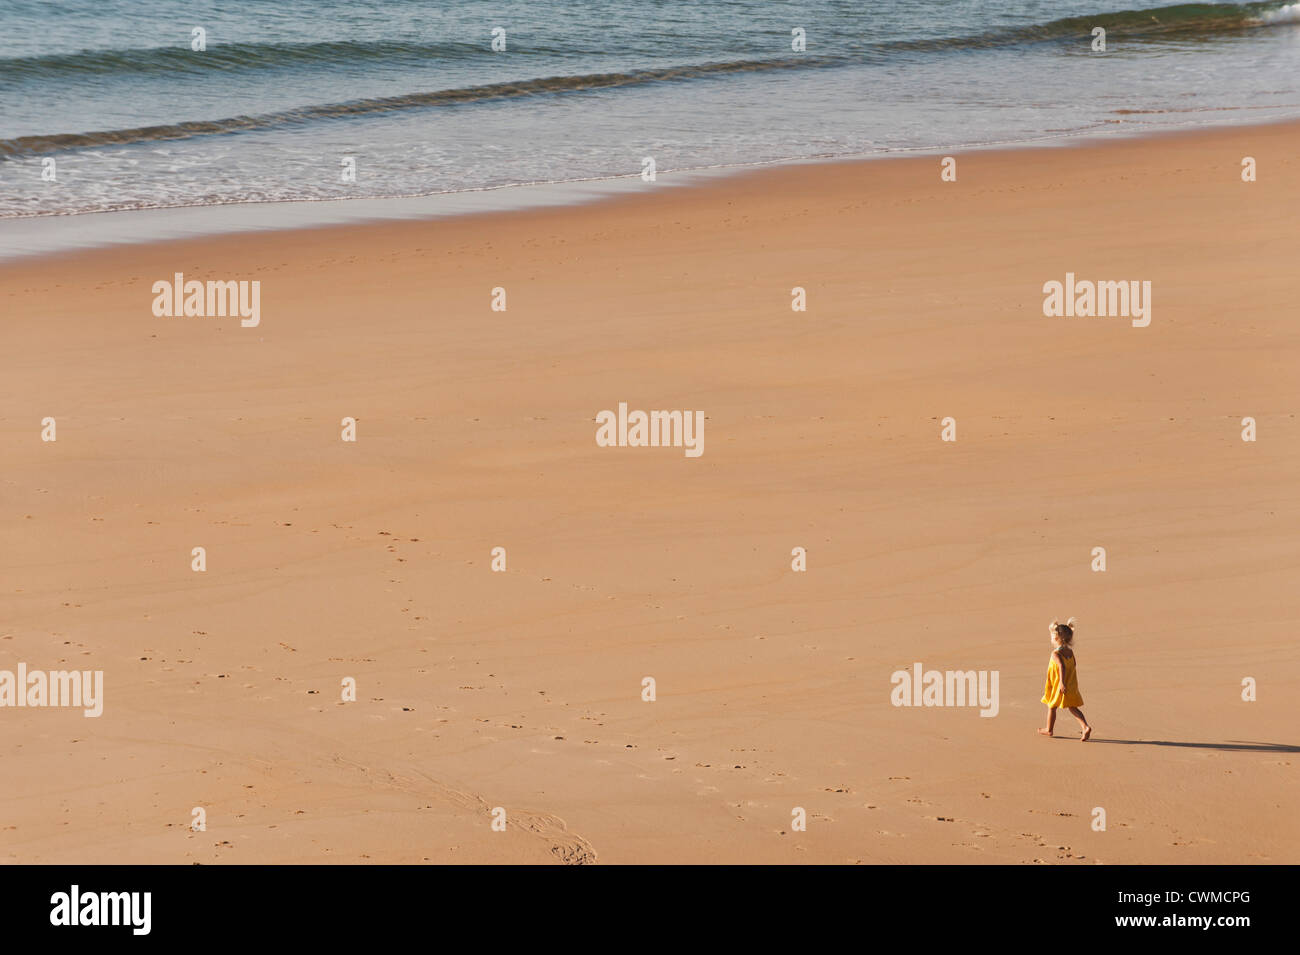 Le Portugal, Girl walking on beach Banque D'Images